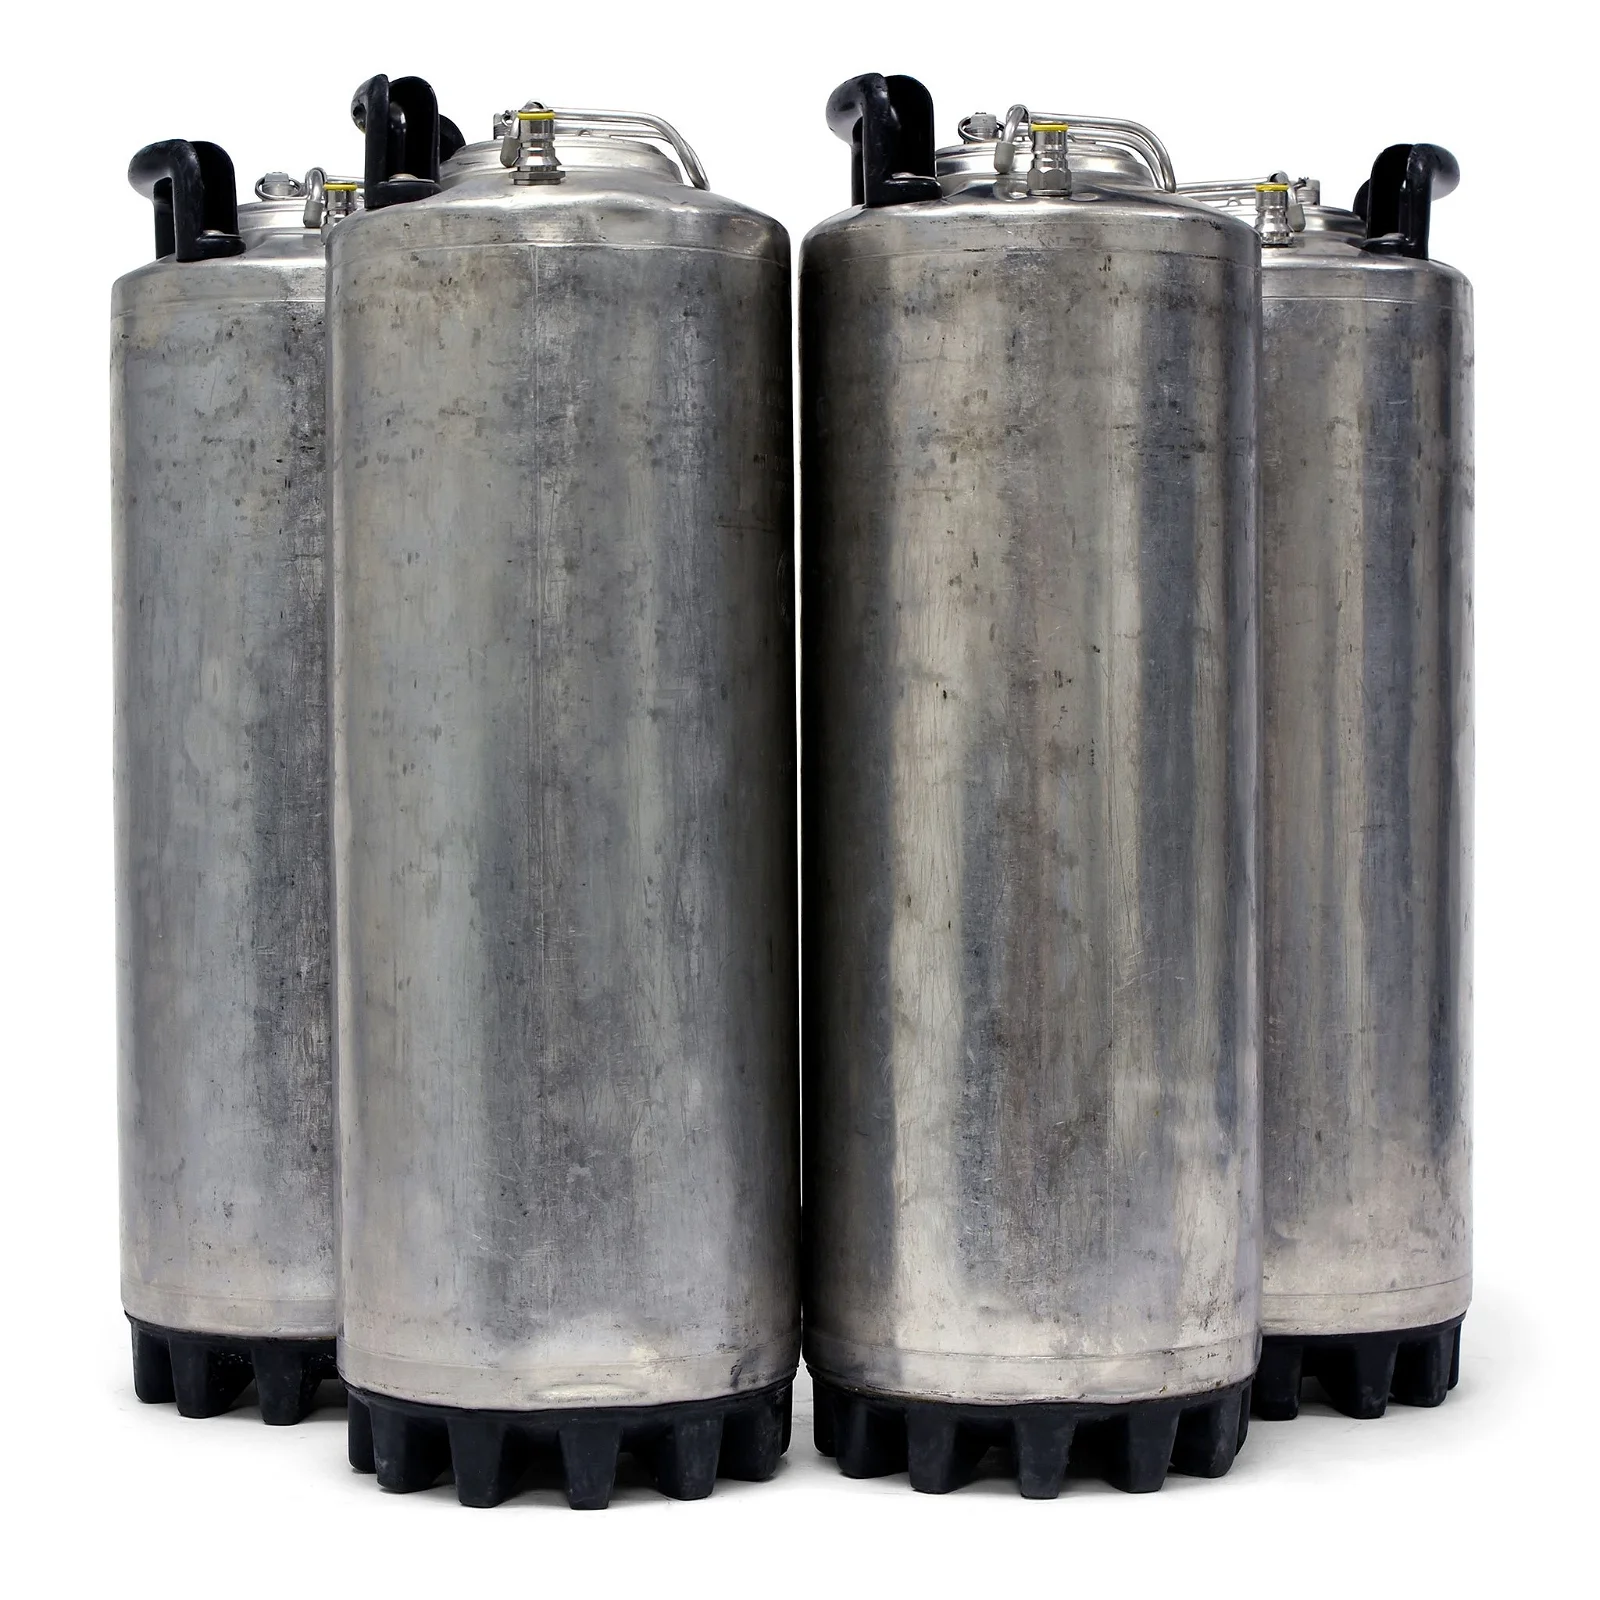 Image of 4-Pack of 5 Gal. Reconditioned Ball Lock Kegs